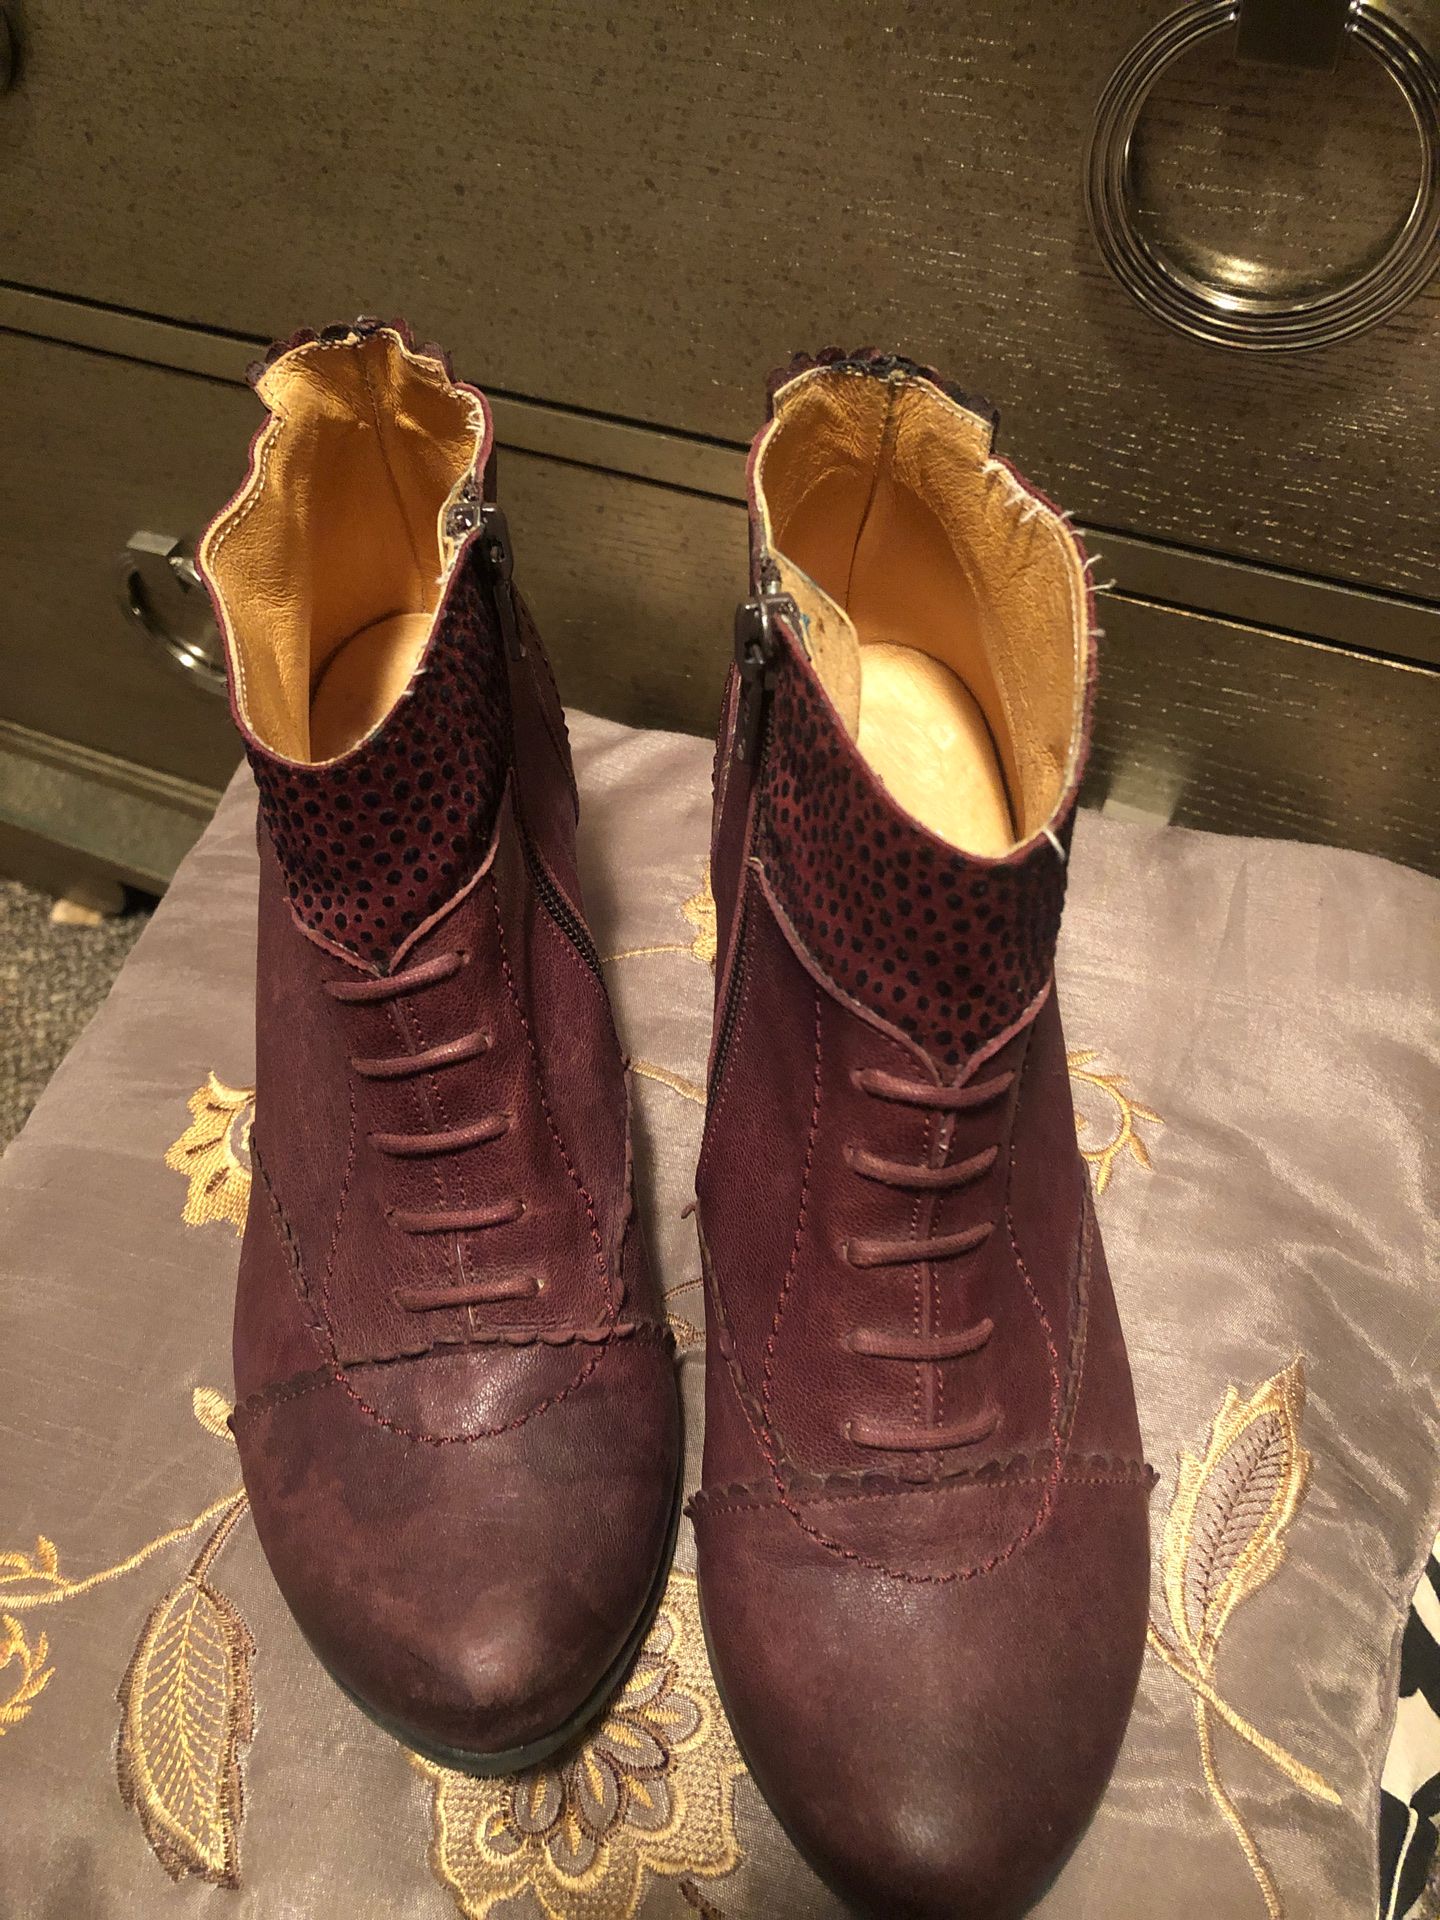 Gold Button Ankle Boots, Size 6.5 in Burgundy. Inside zip